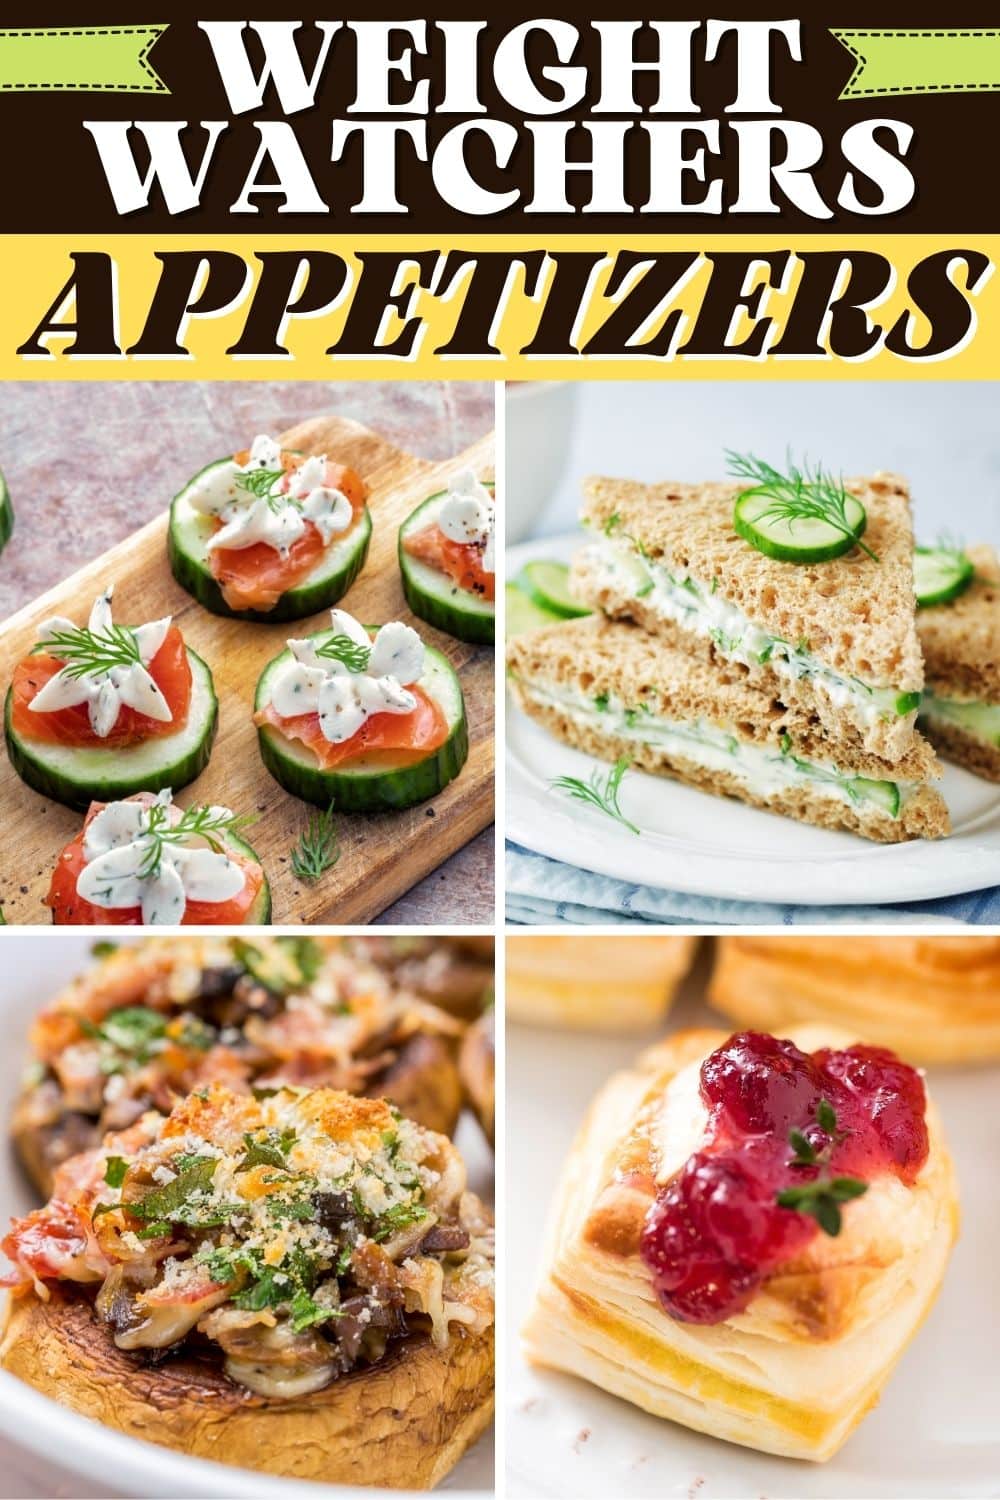 25 Best Weight Watchers Appetizers - Insanely Good